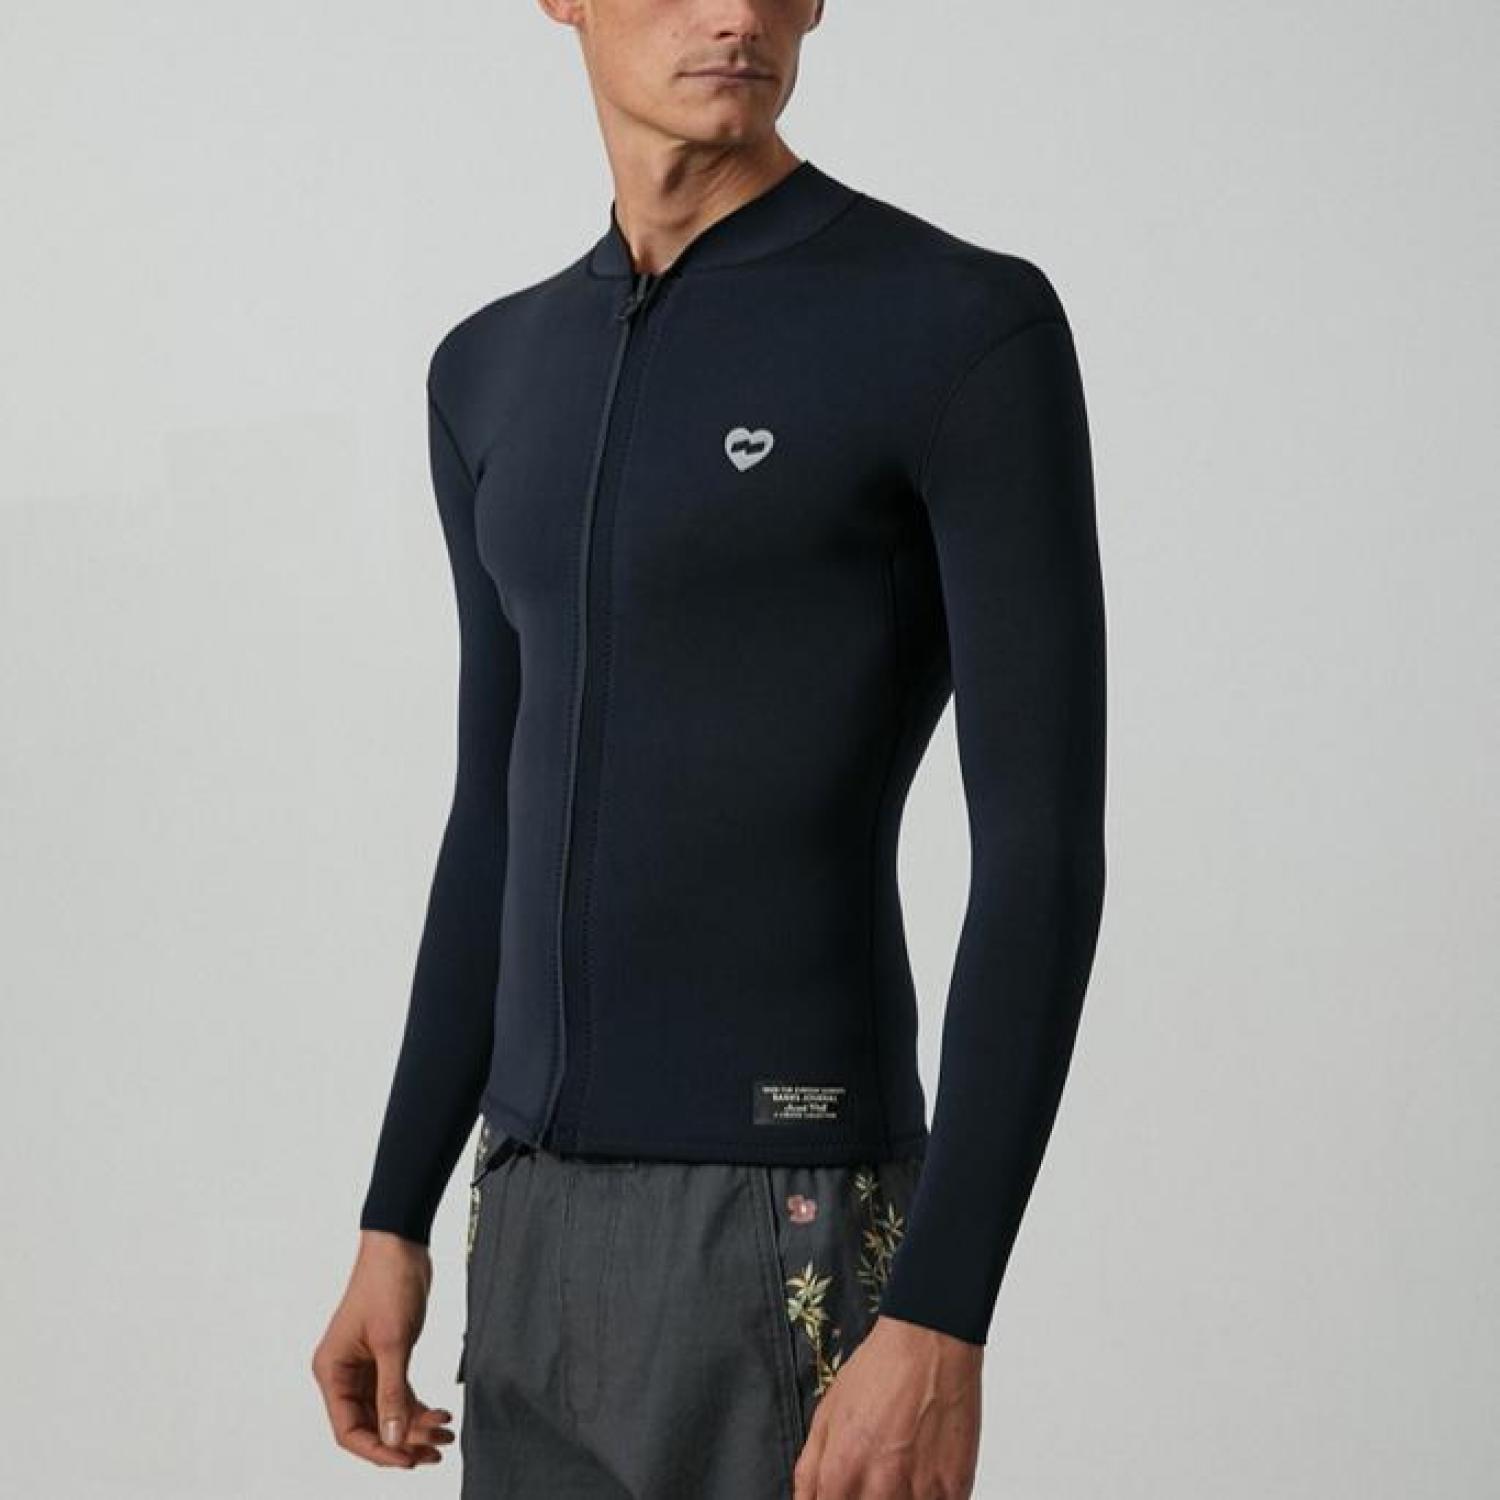 JARED MELL FRONT ZIP WETSUIT